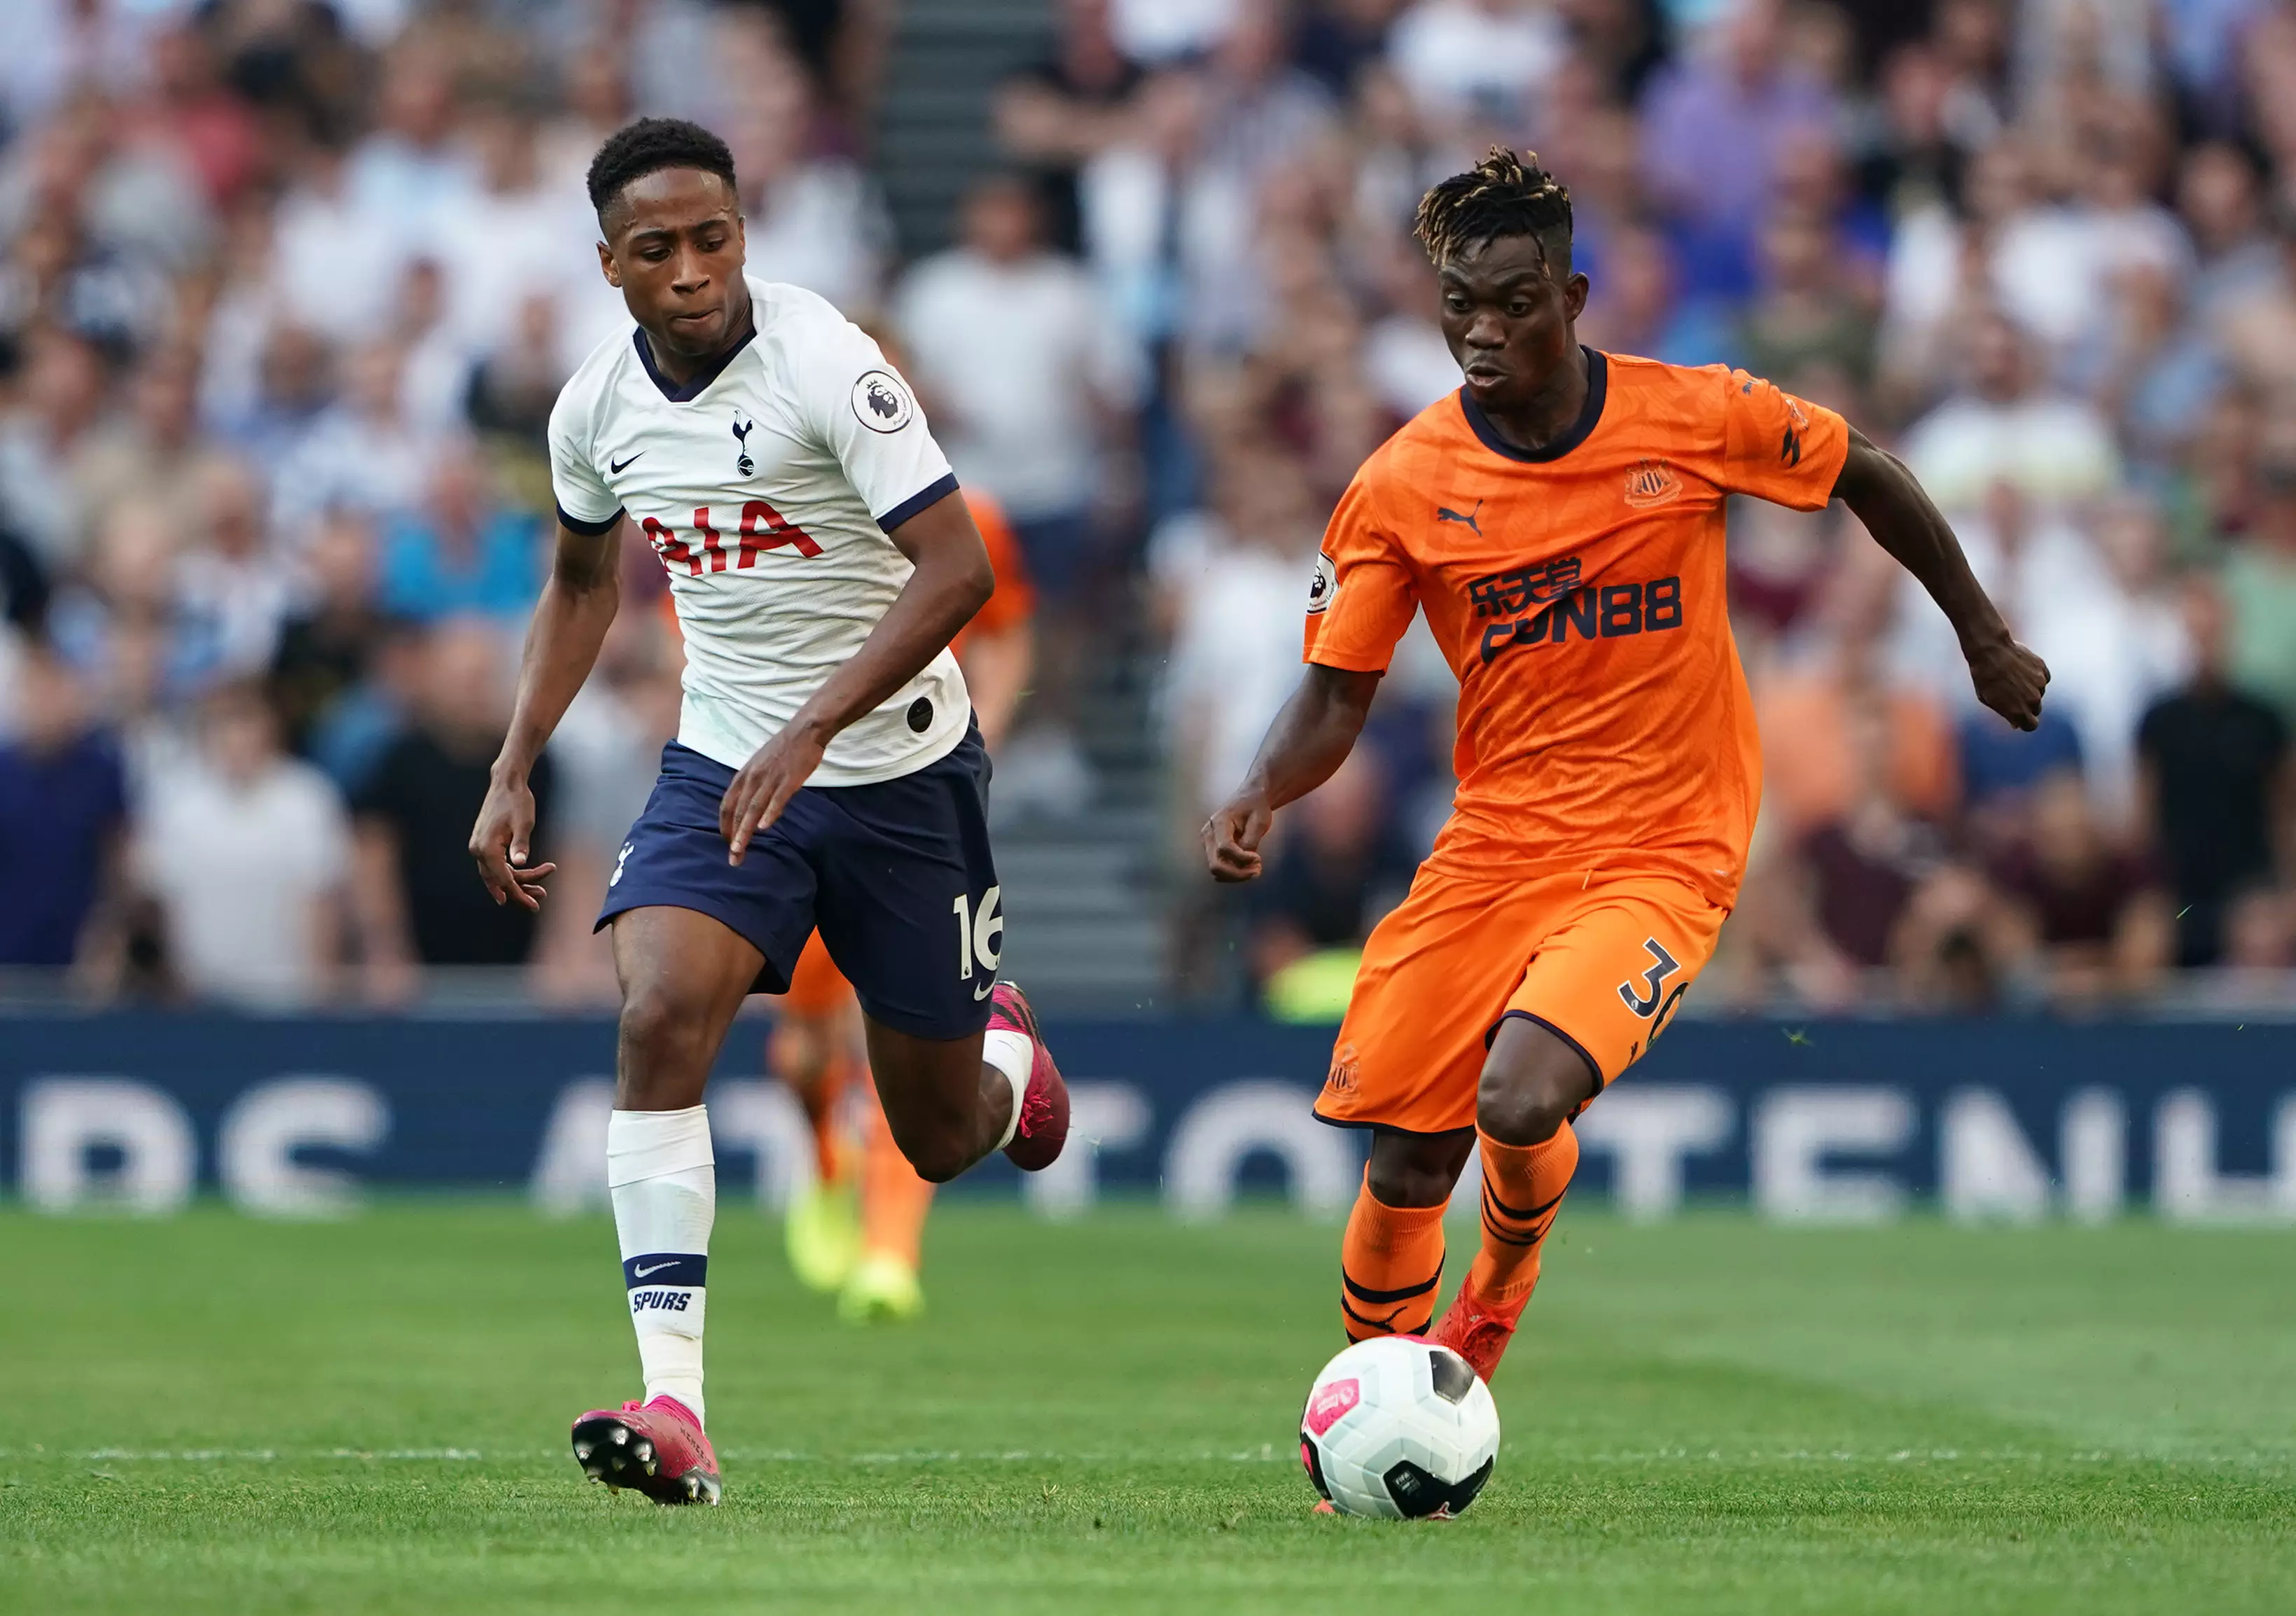 Walker-Peters playing against Newcastle United. Image: PA Images